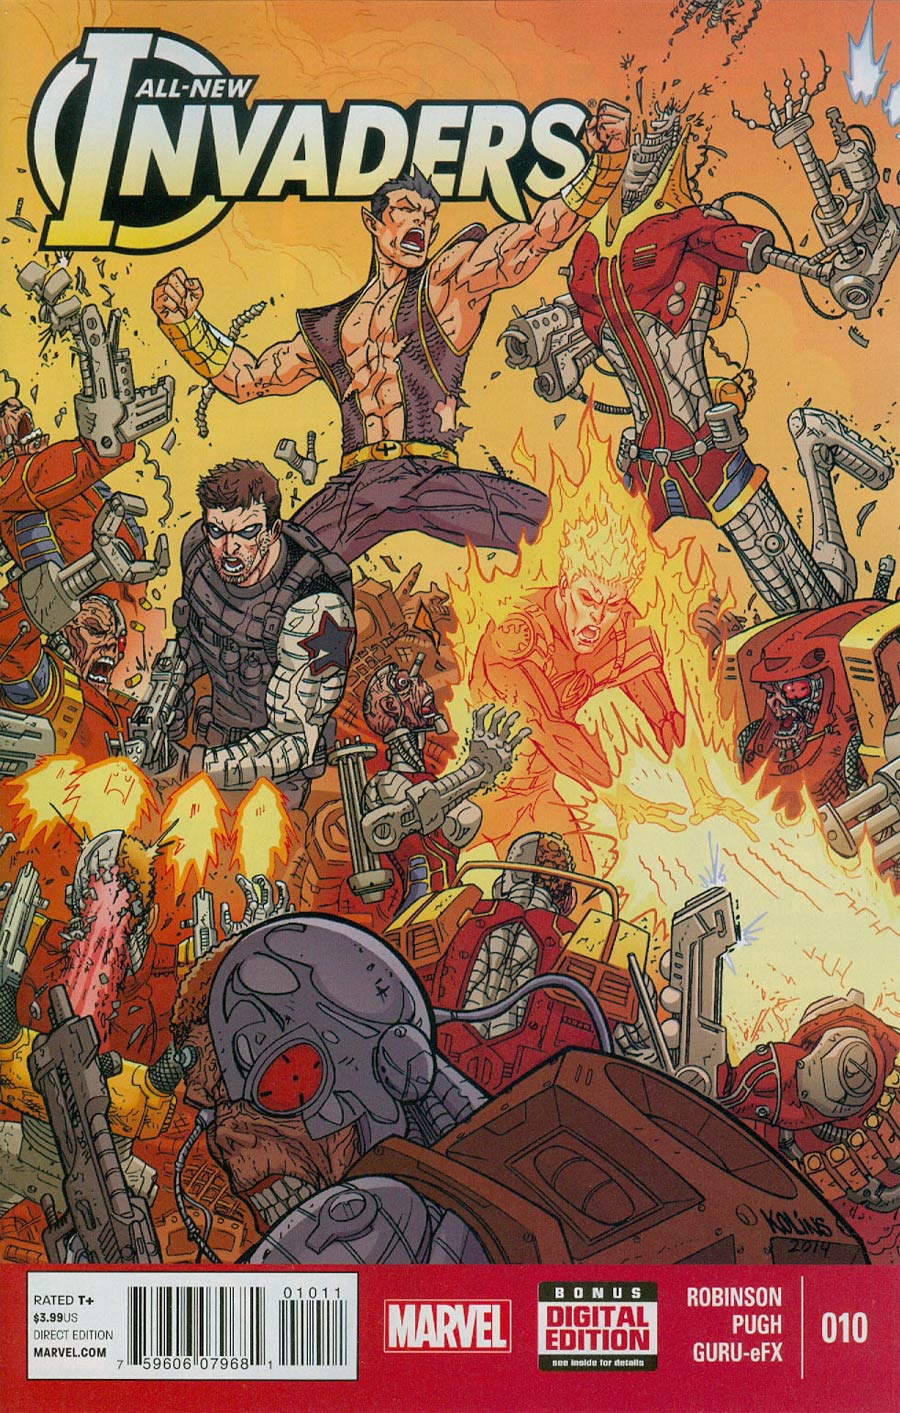 All-New Invaders #10